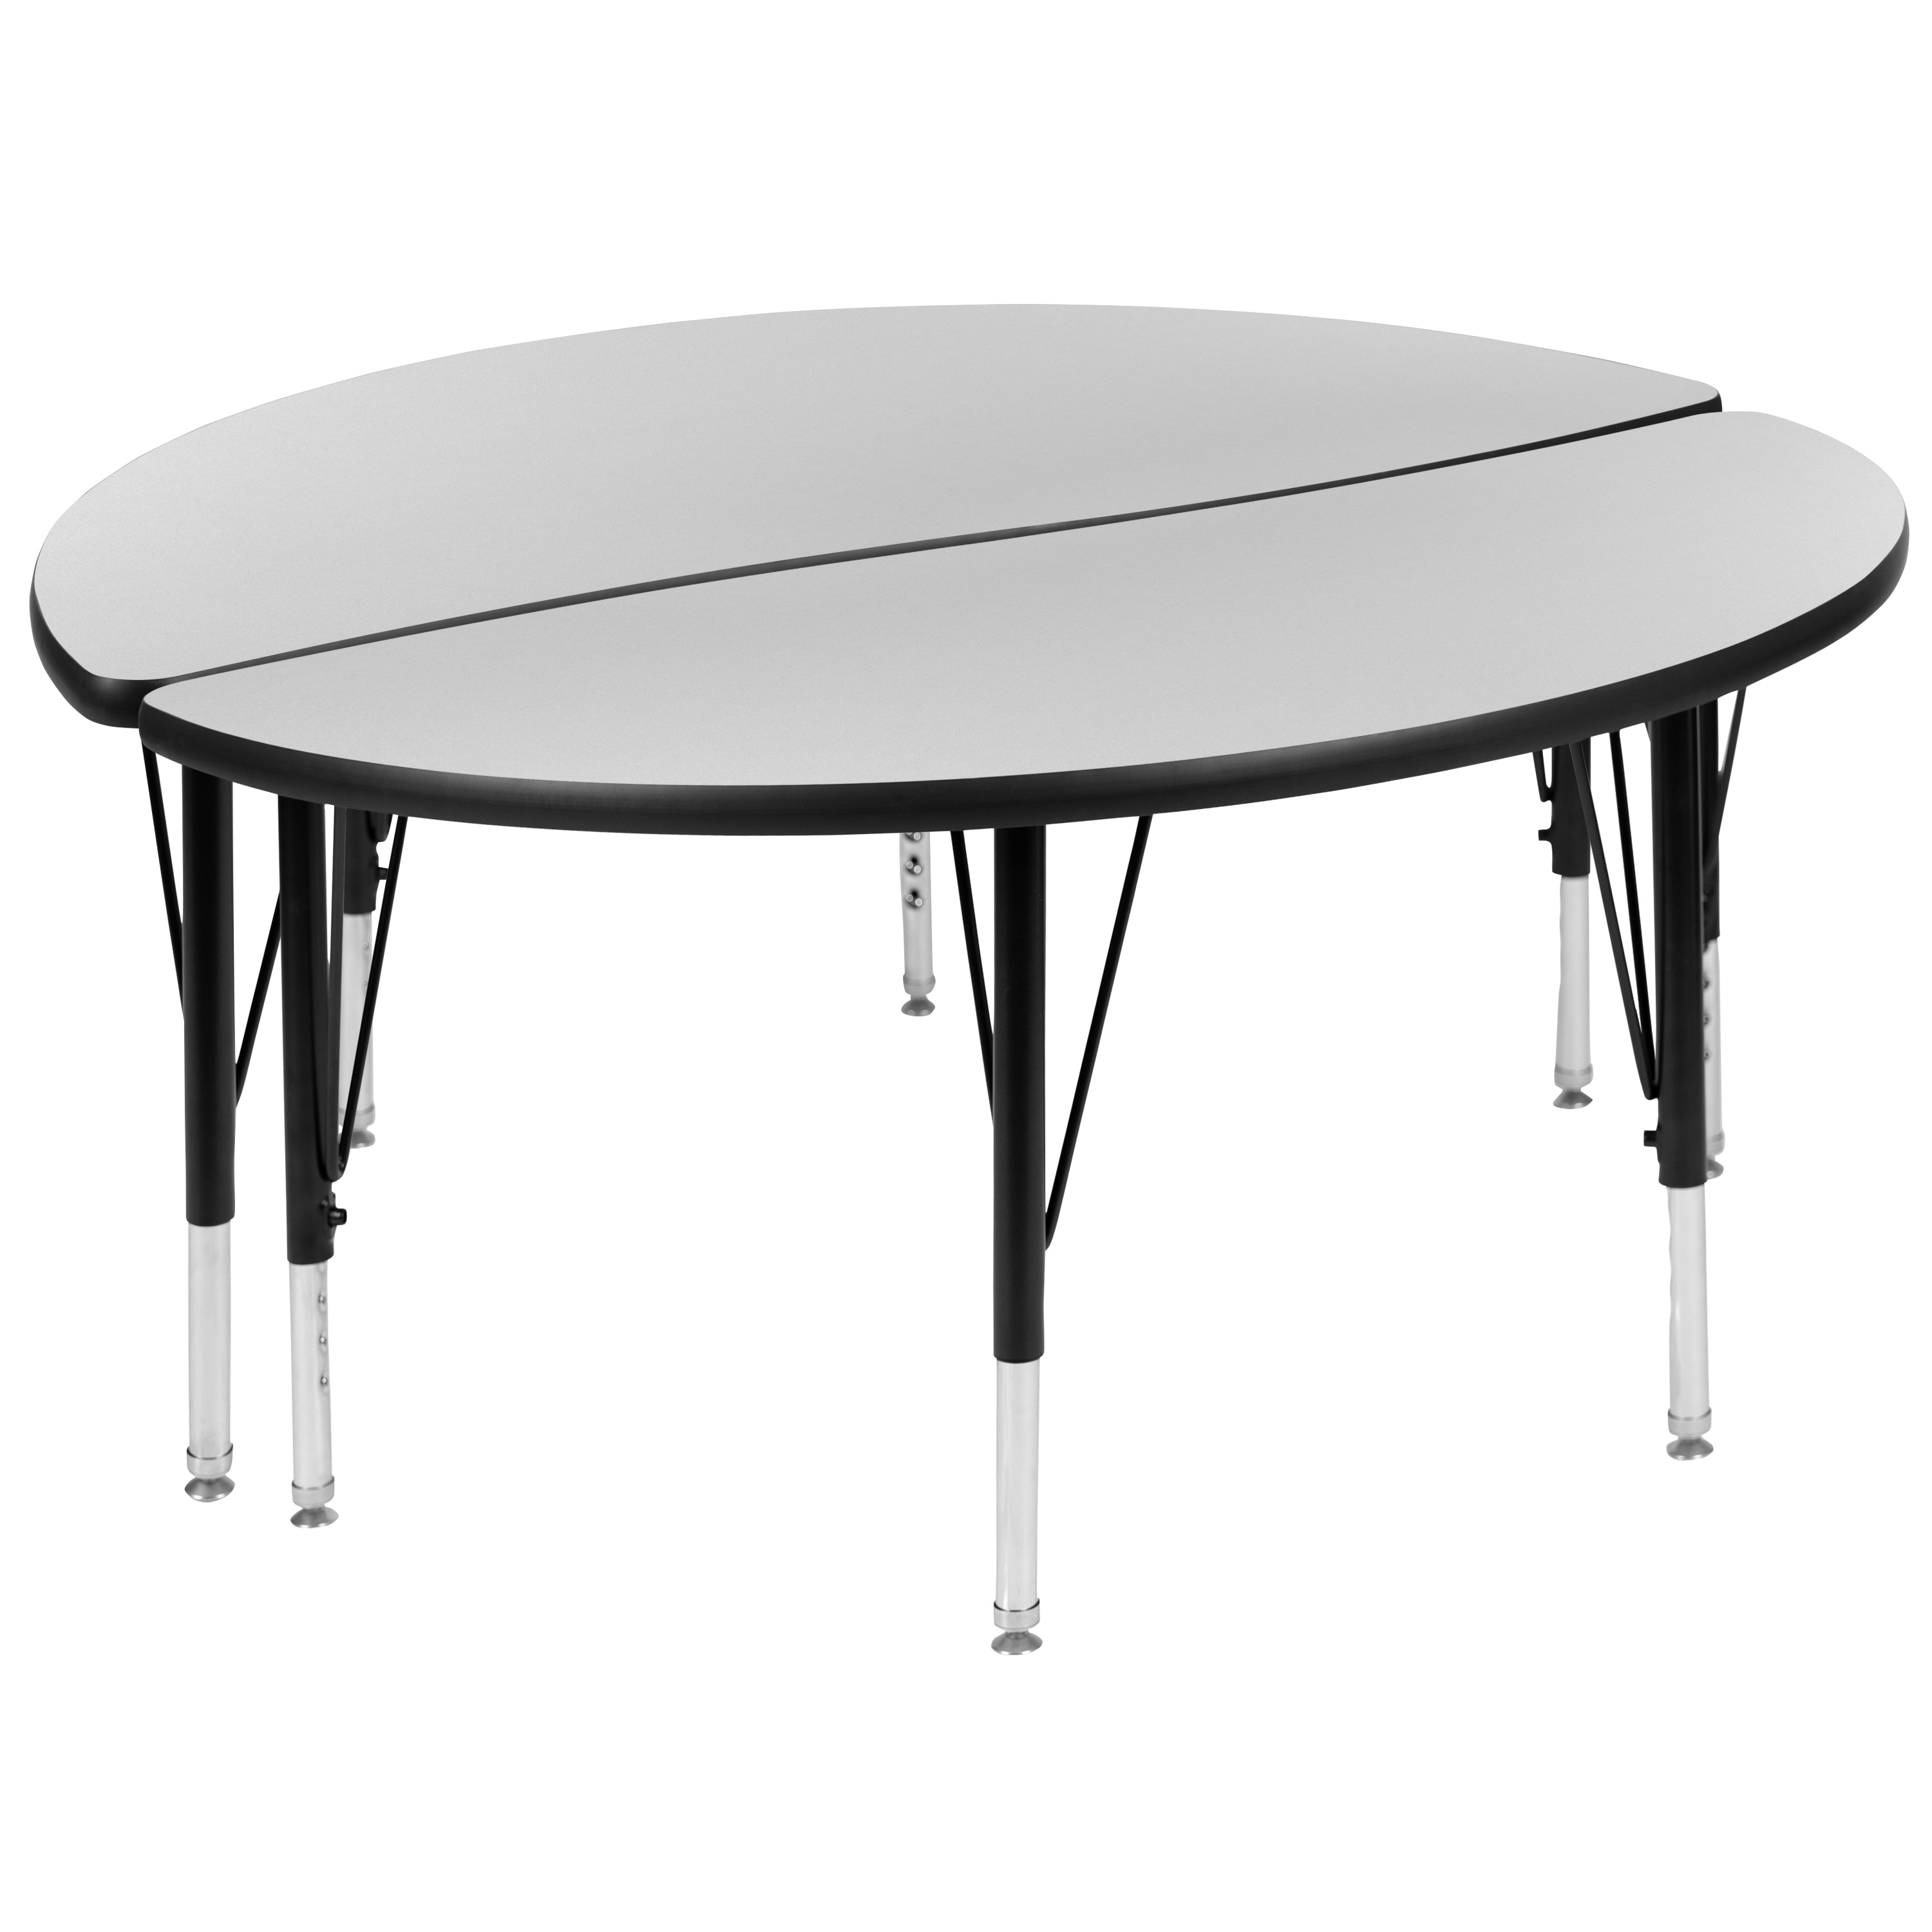 2 Piece 47.5" Circle Wave Flexible Grey Thermal Laminate Activity Table Set - Height Adjustable Short Legs-Collaborative Activity Table Set-Flash Furniture-Wall2Wall Furnishings